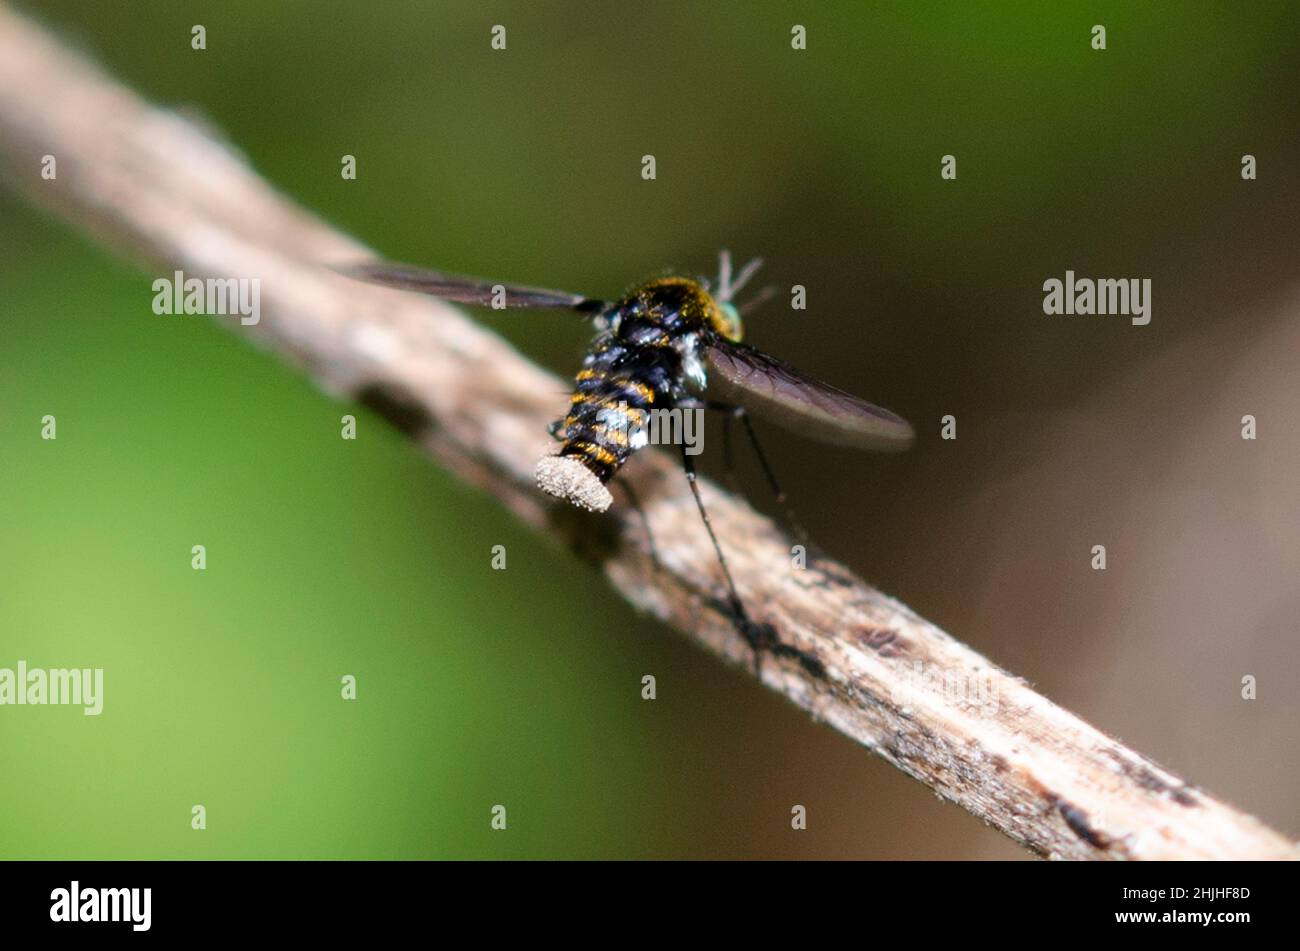 Humblefly, Bombyliidae Family, with tail covered in pollen, West Bali National Park, near Menjangan Island, Buleleng, Bali, Indonesia Stock Photo